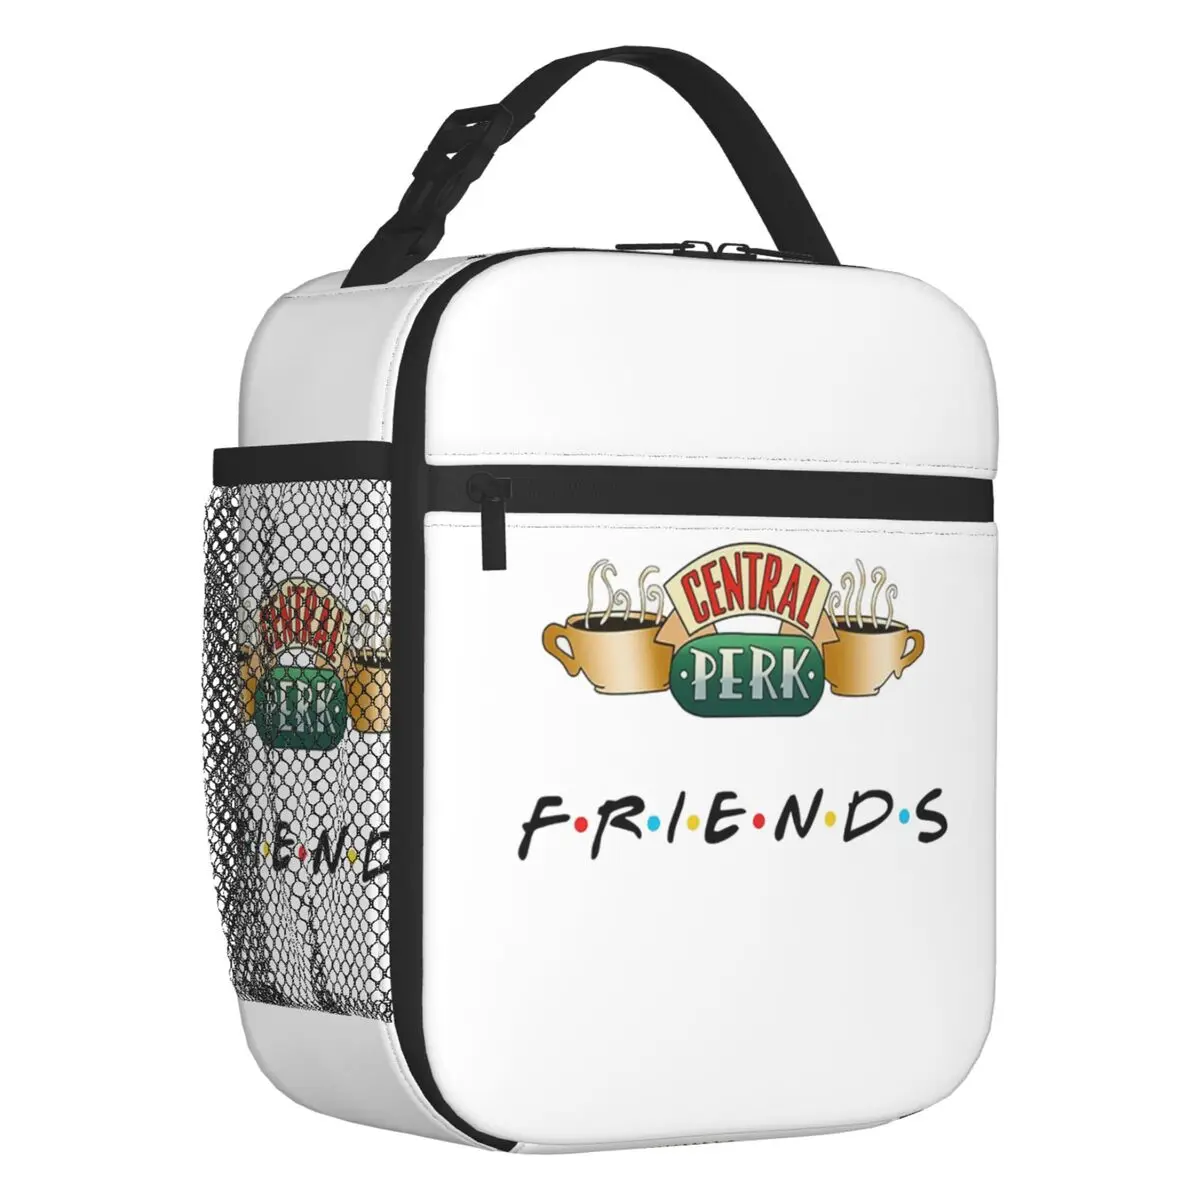 

Funny Friends TV Show Portable Lunch Boxes Leakproof Central Perk Cafe Comic Thermal Cooler Food Insulated Lunch Bag School